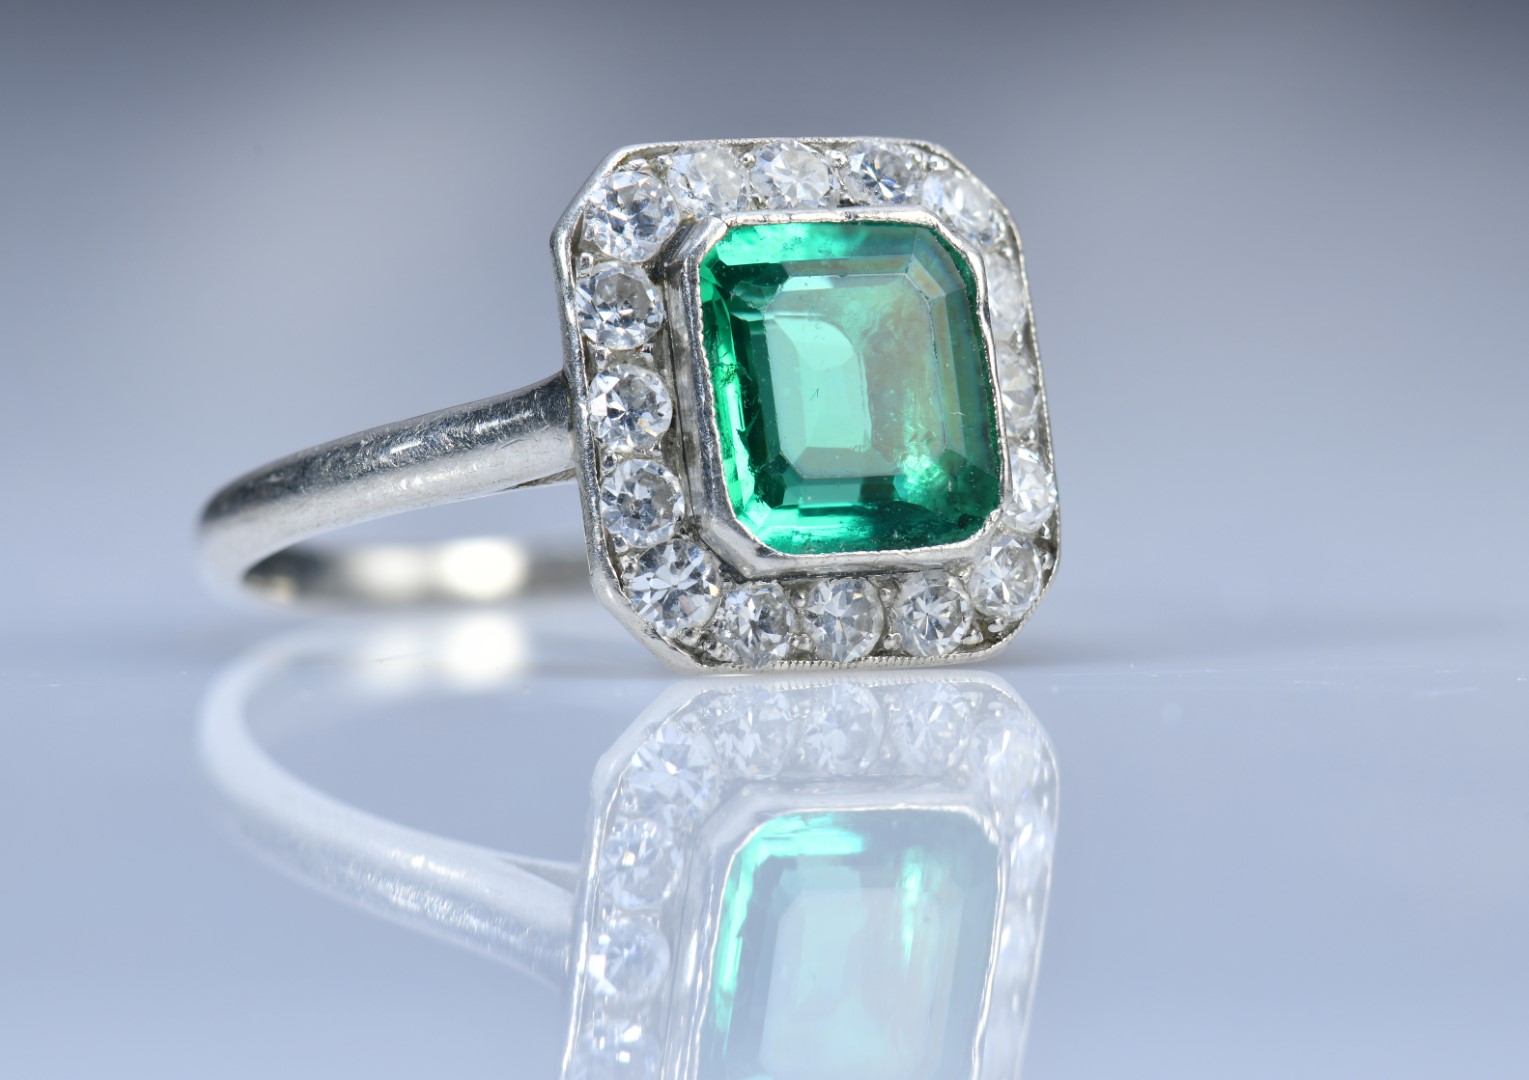 Art Deco platinum ring set with an emerald cut emerald of approximately 1ct surrounded by 16 round